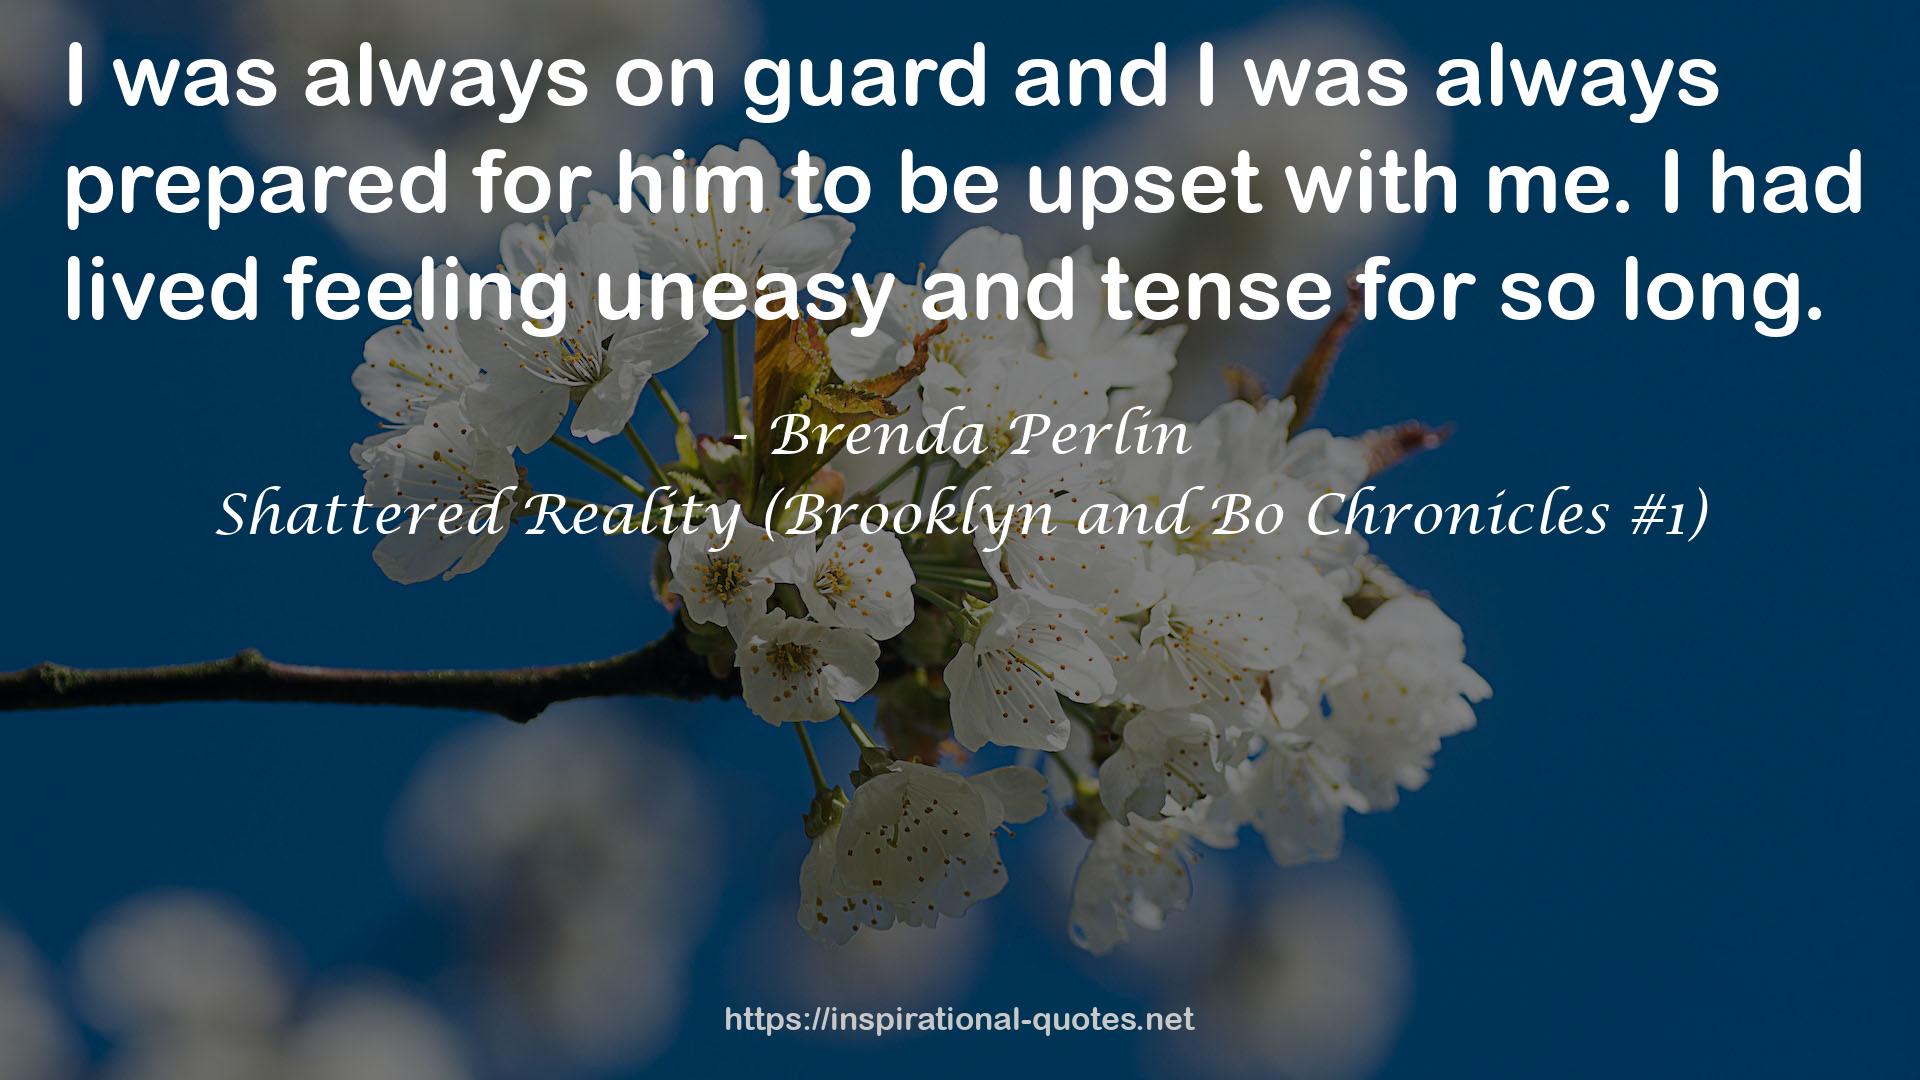 Shattered Reality (Brooklyn and Bo Chronicles #1) QUOTES